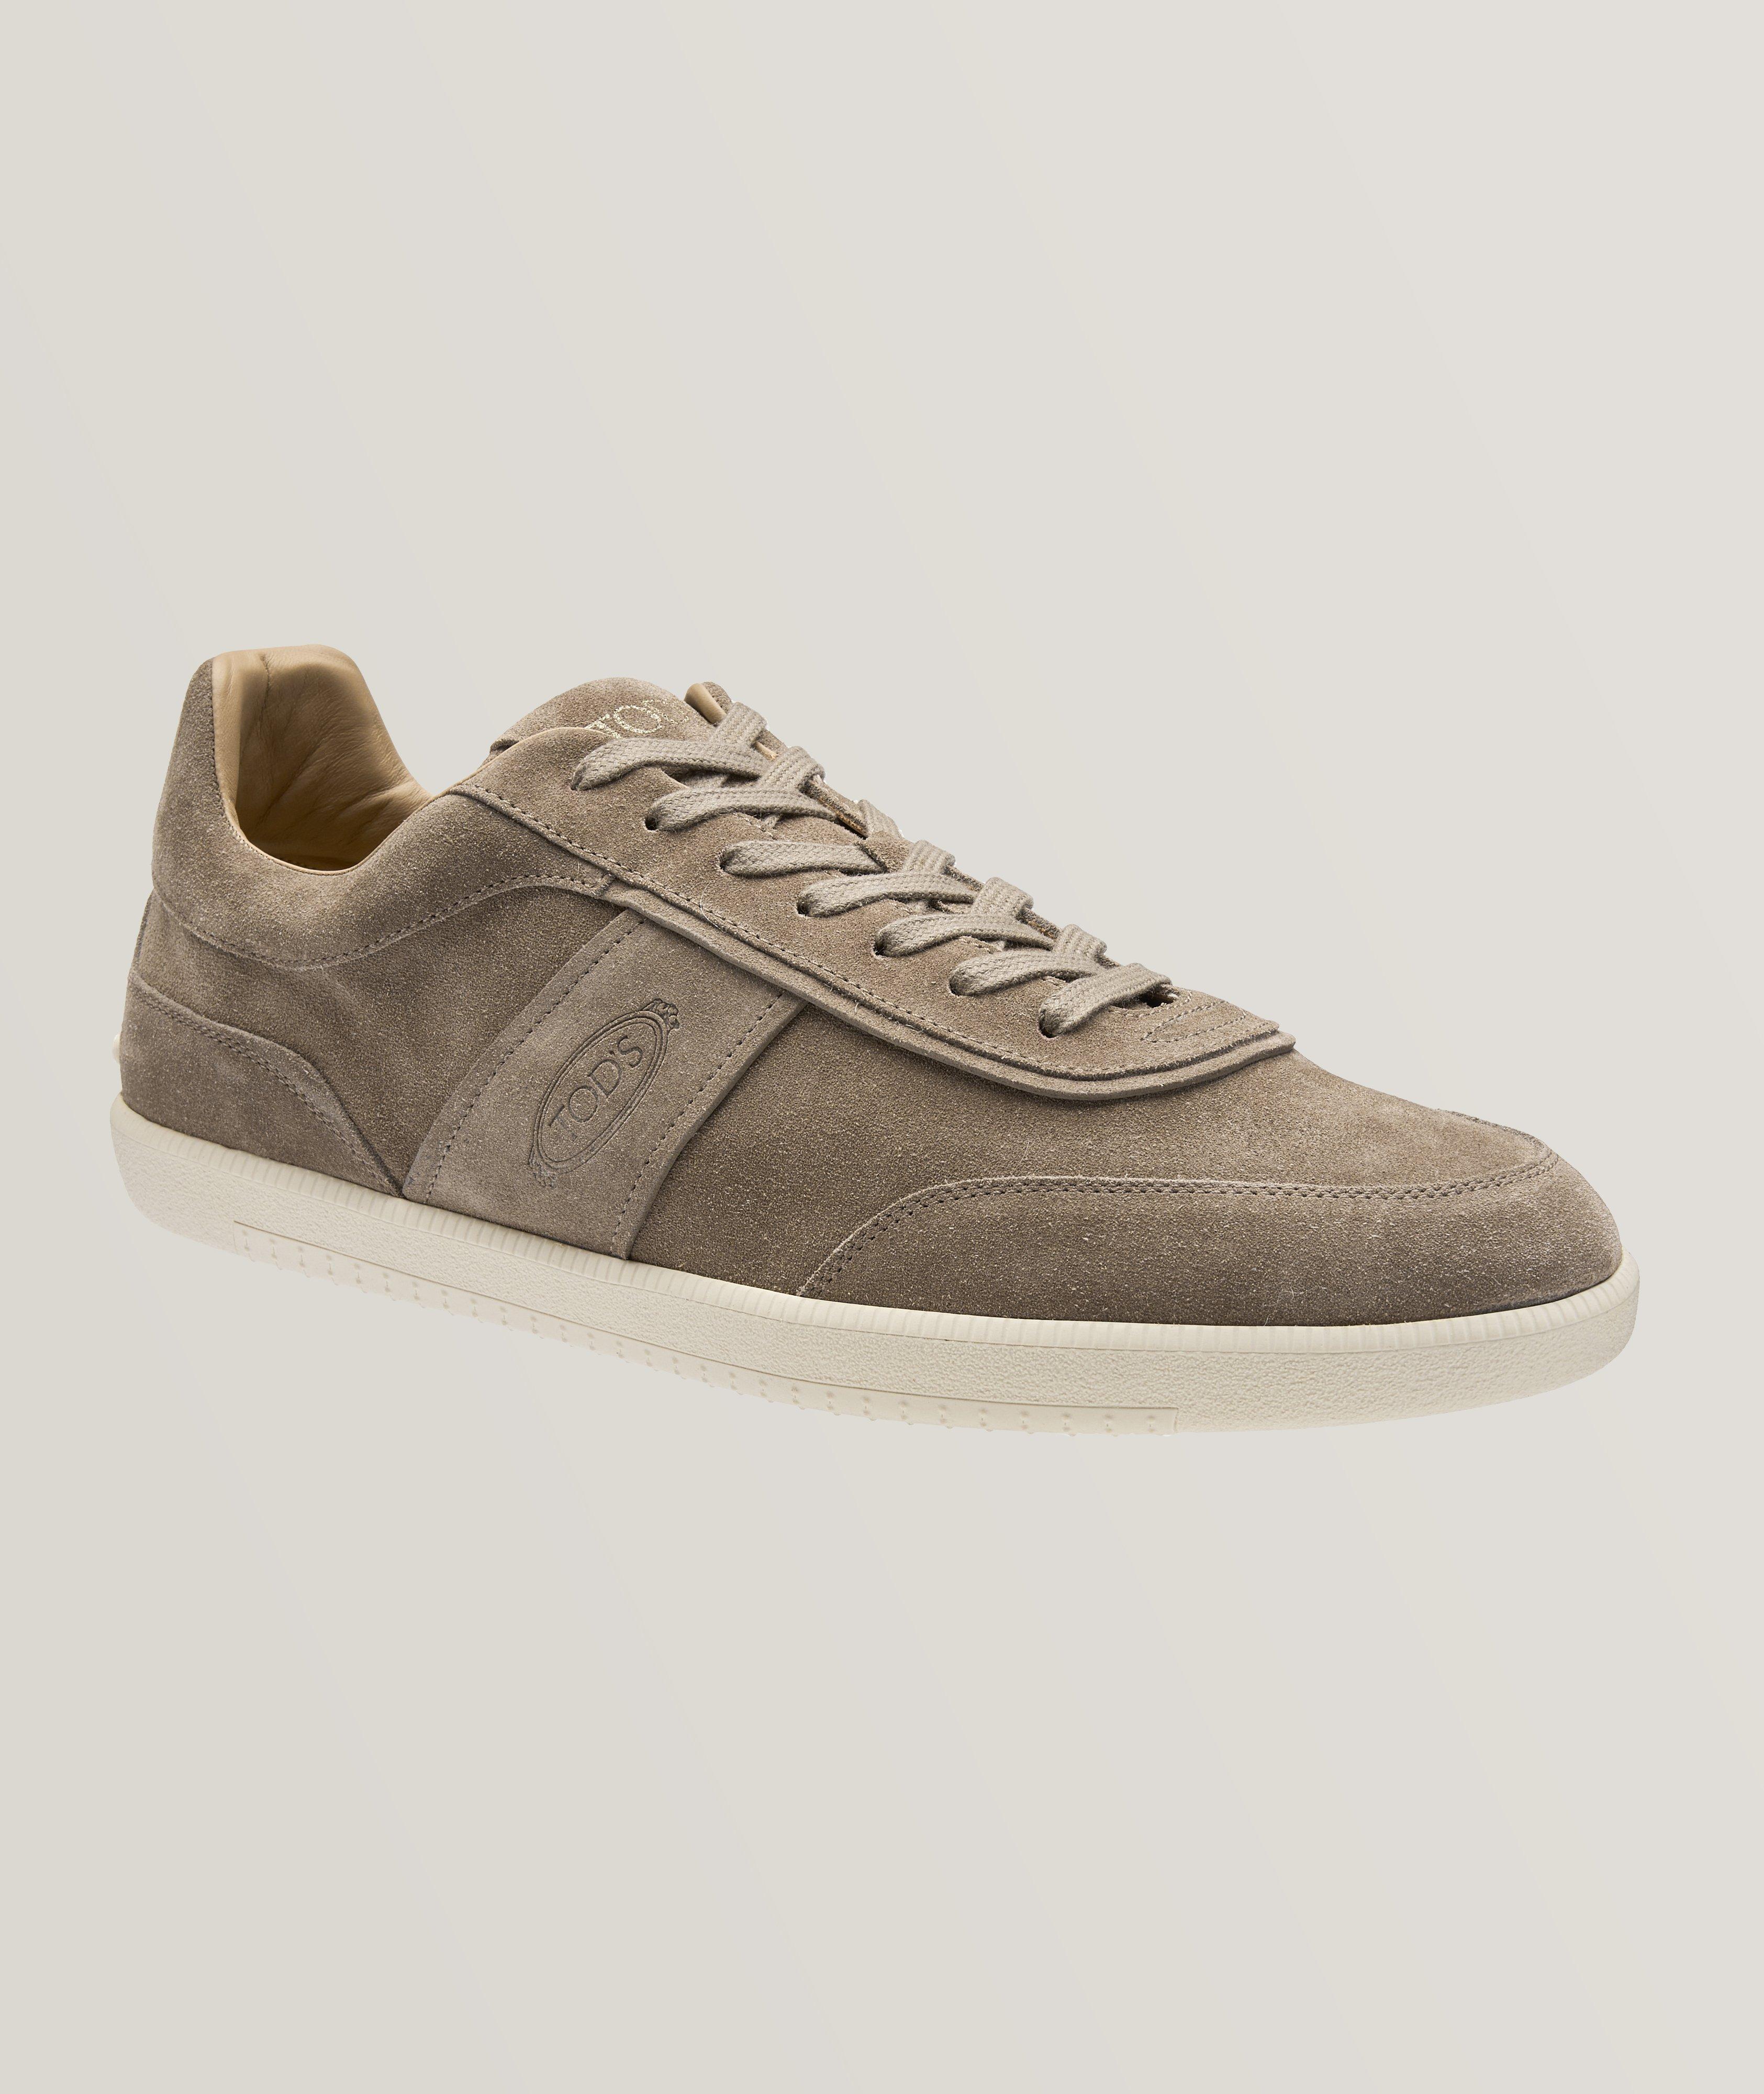 Suede Logo Panel Sneakers image 0